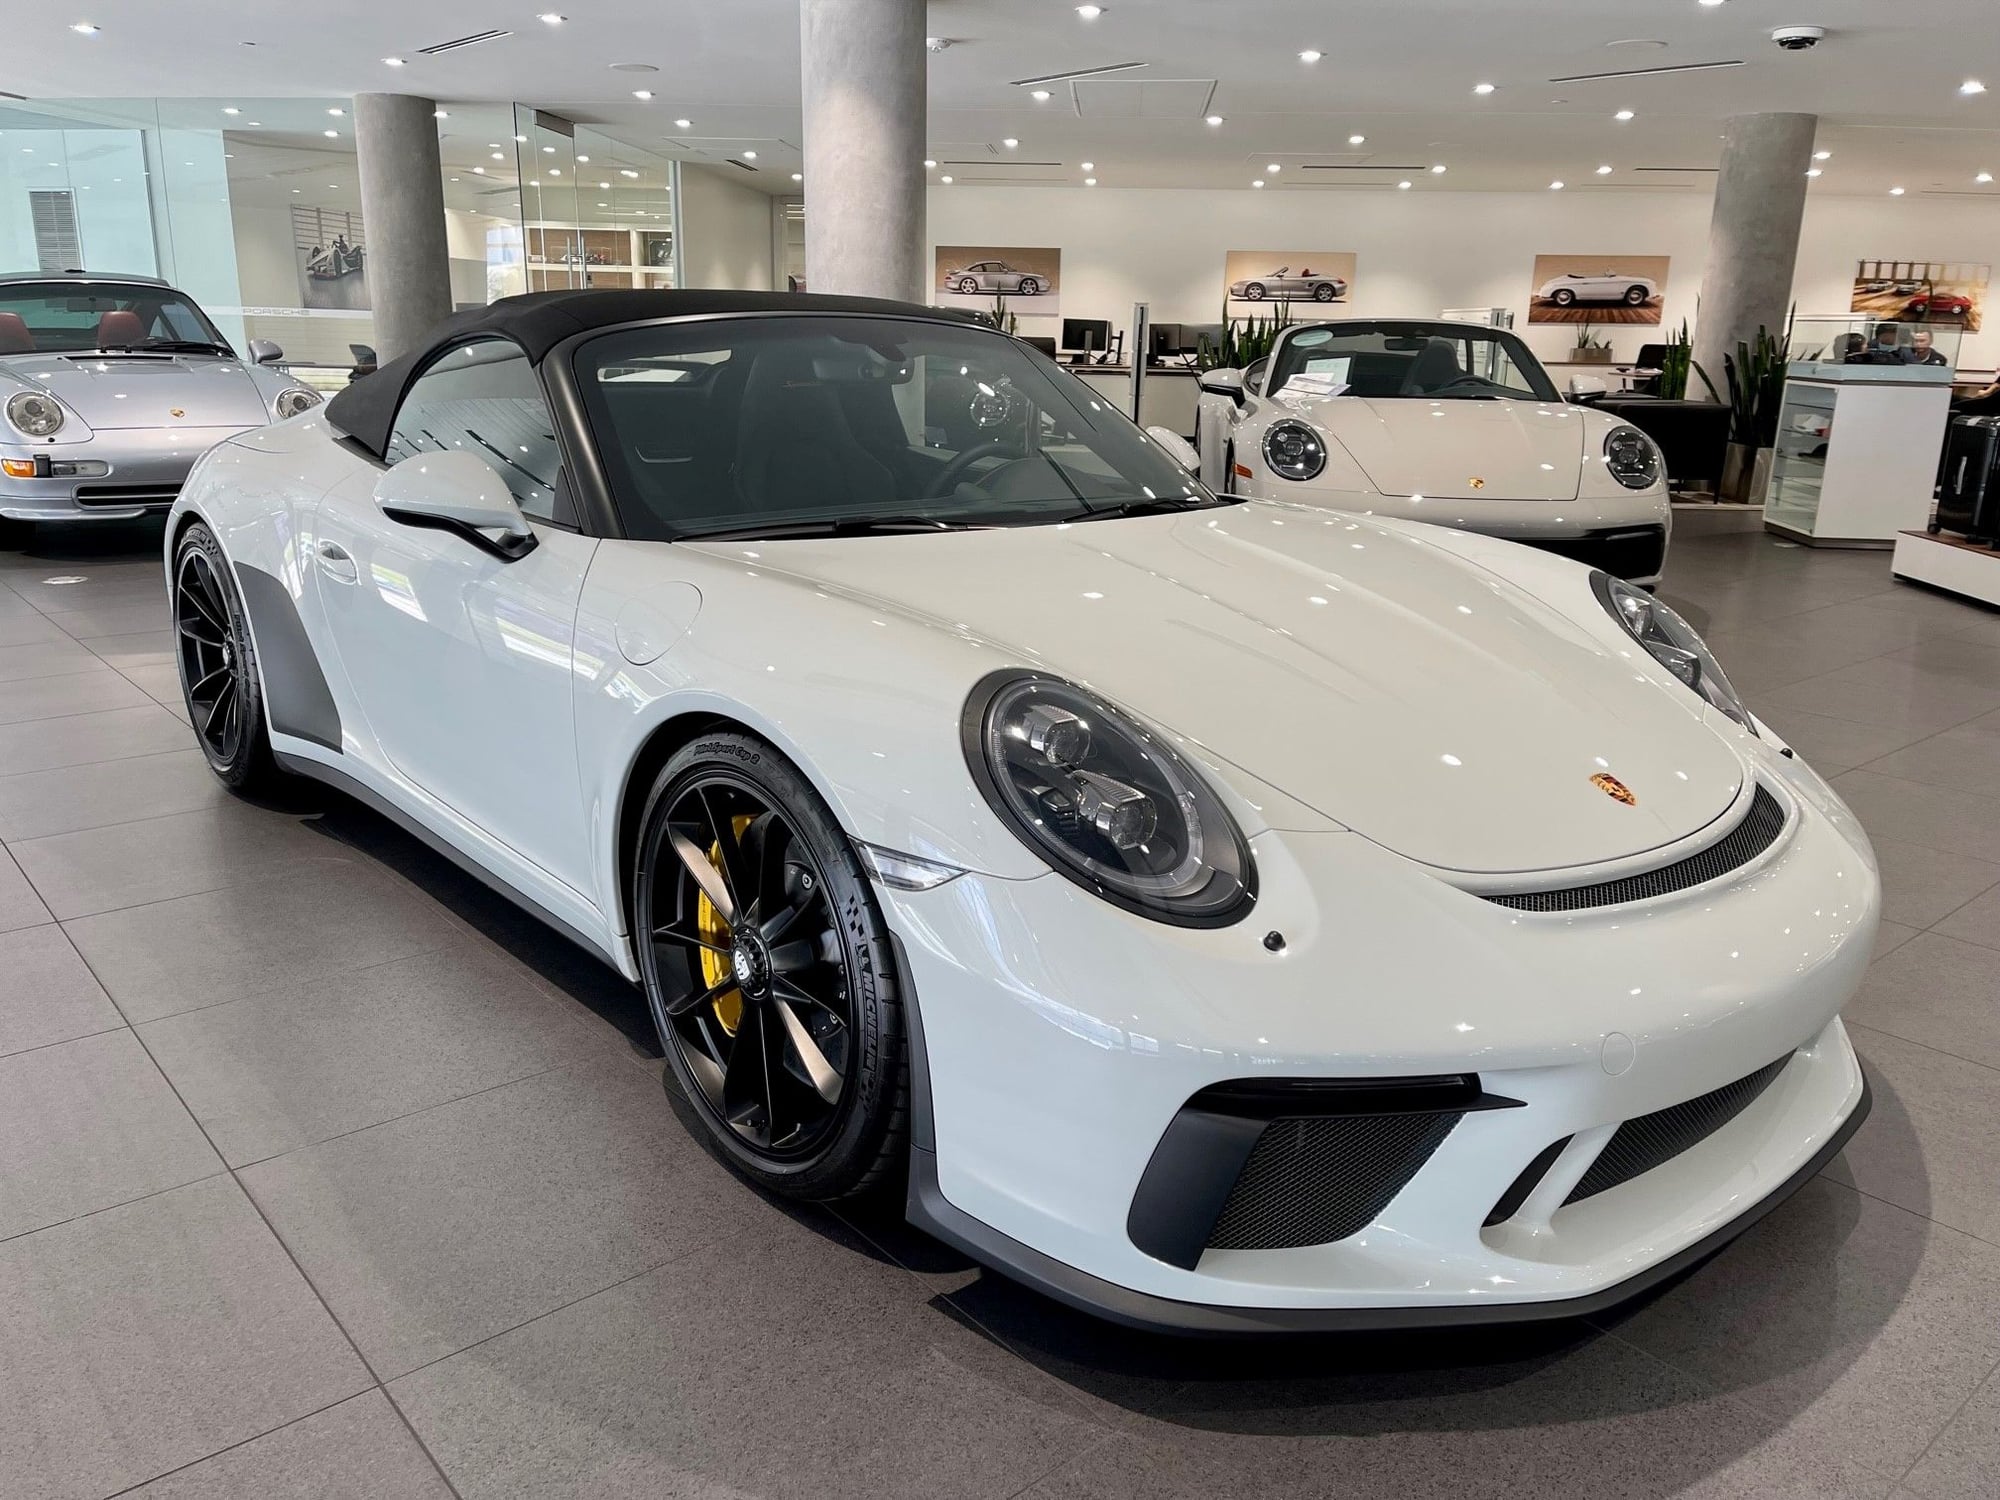 2019 Porsche 911 - 2019 911 Speedster PTS Dolphin Grey CPO Delivery Miles - Used - Austin, TX 78759, United States